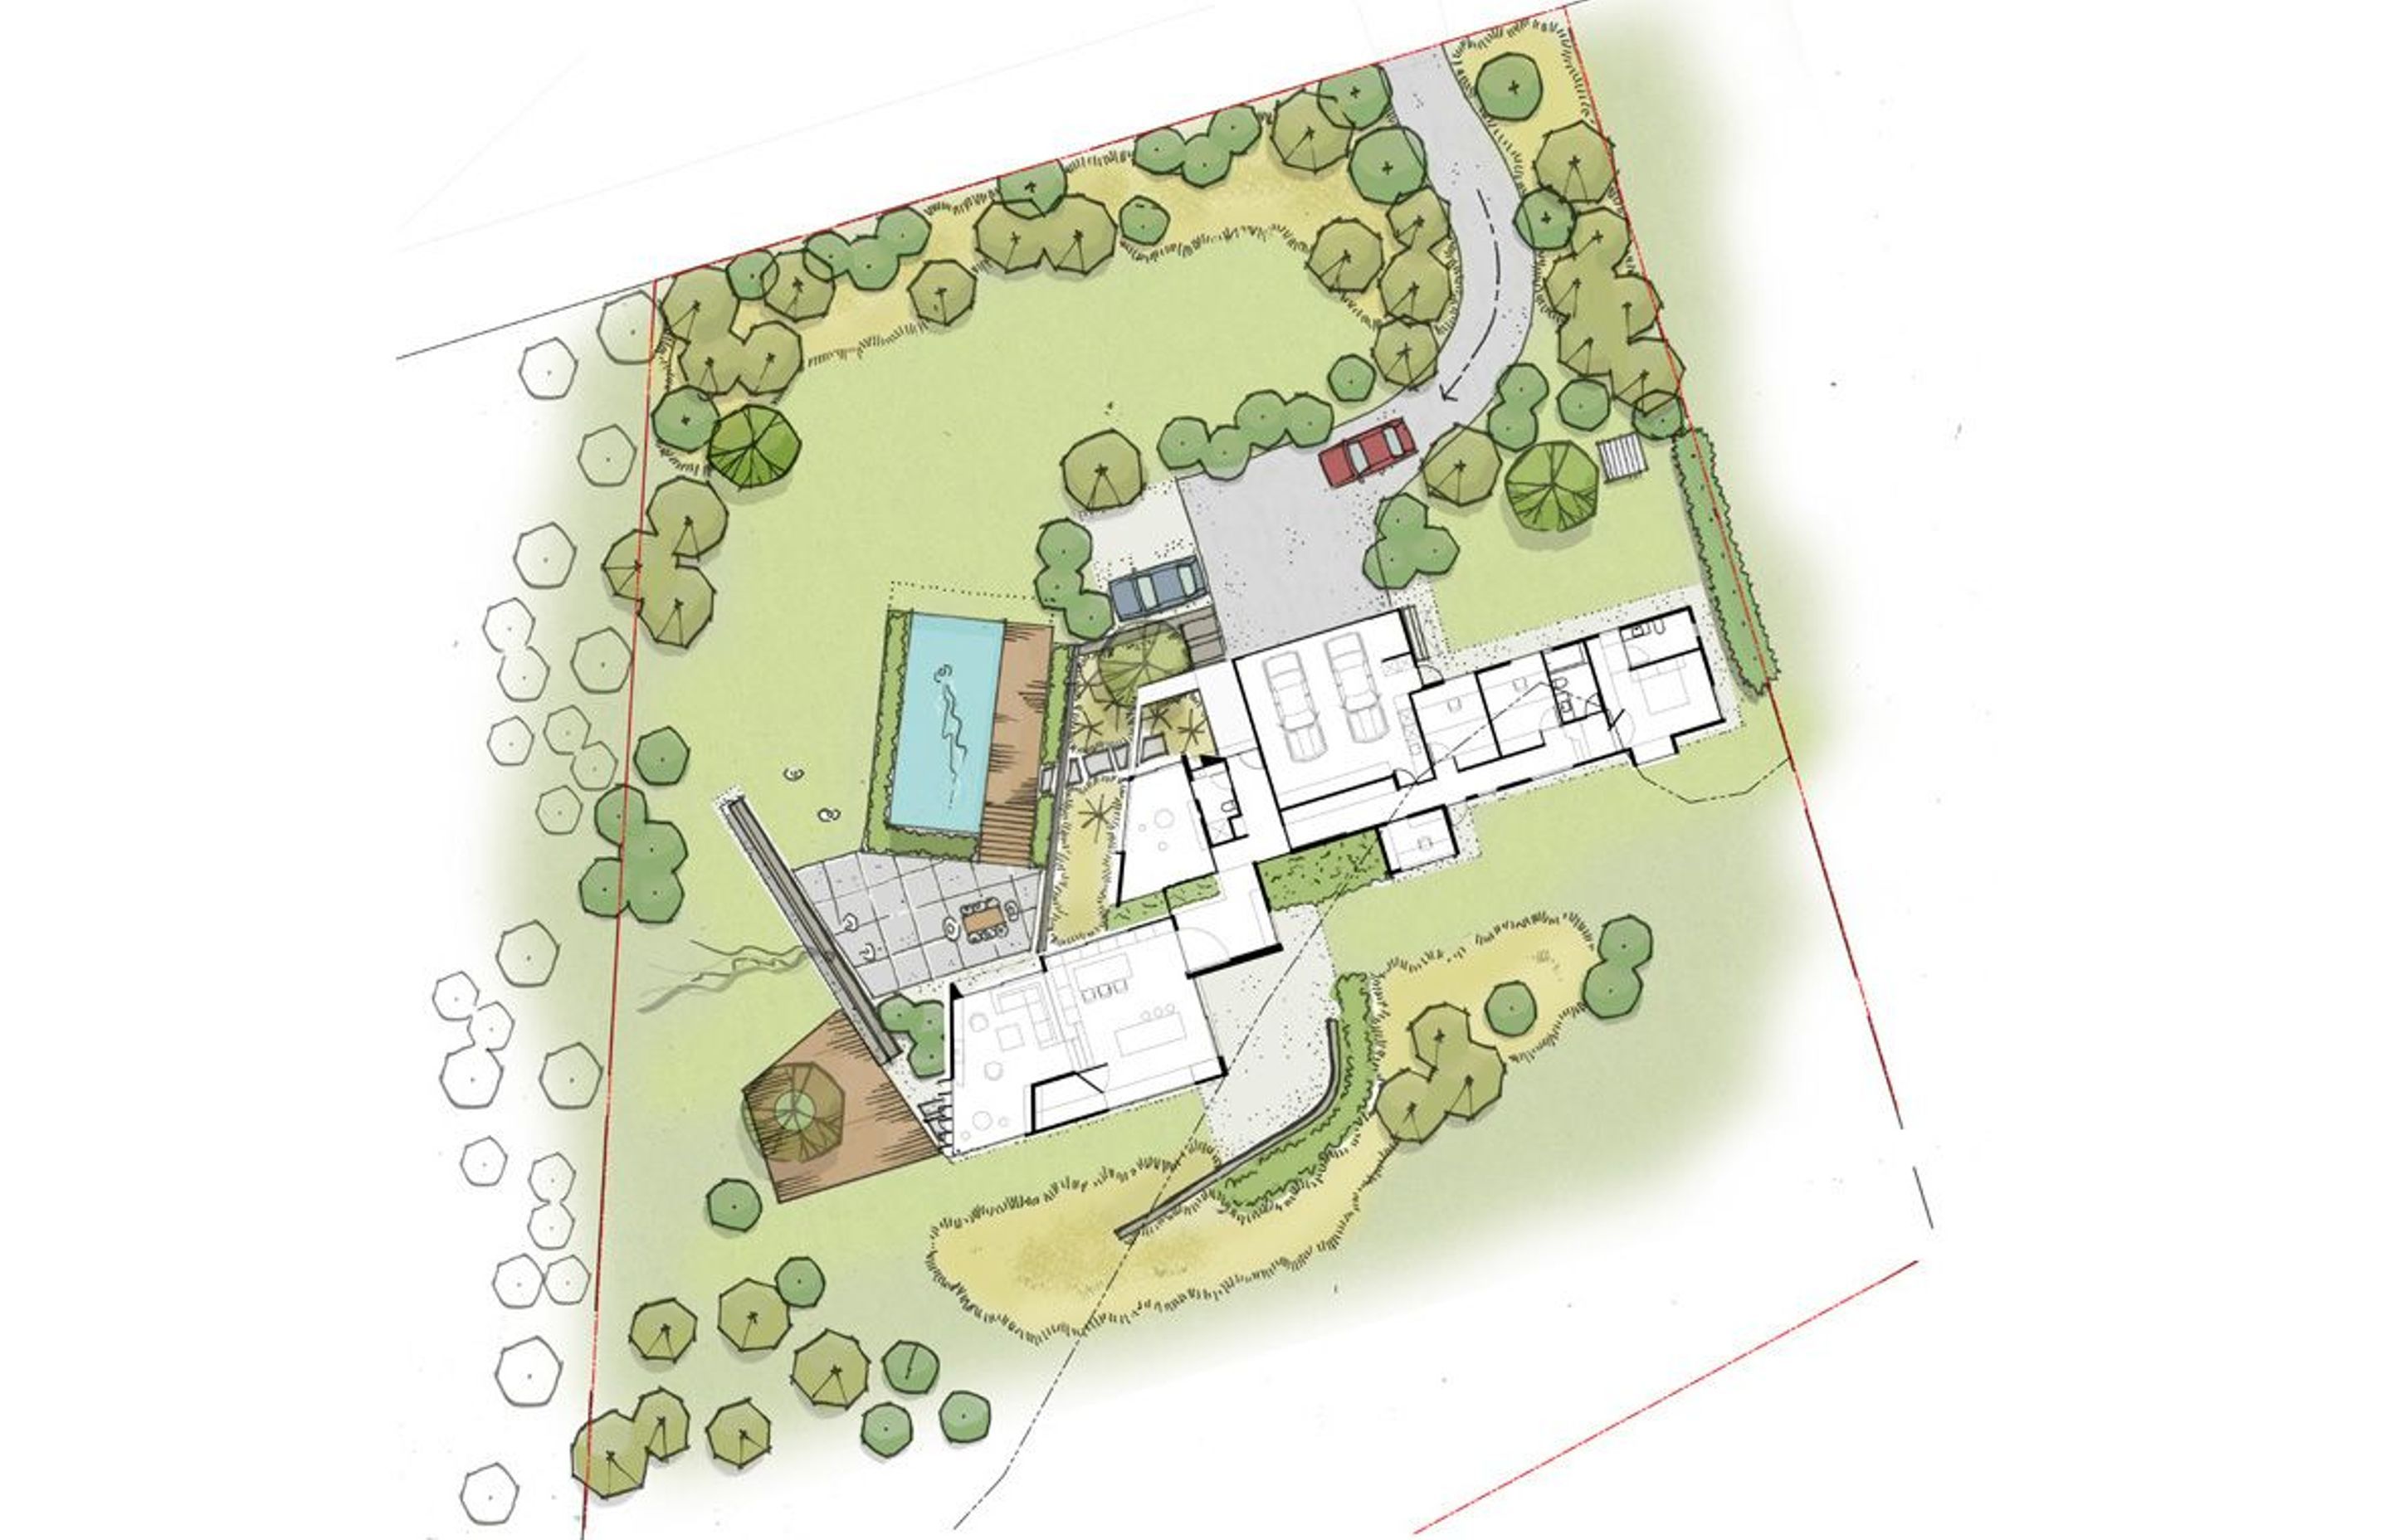 Original site plan concept by Hyndman Taylor Architects with a swimming pool planned for the future.